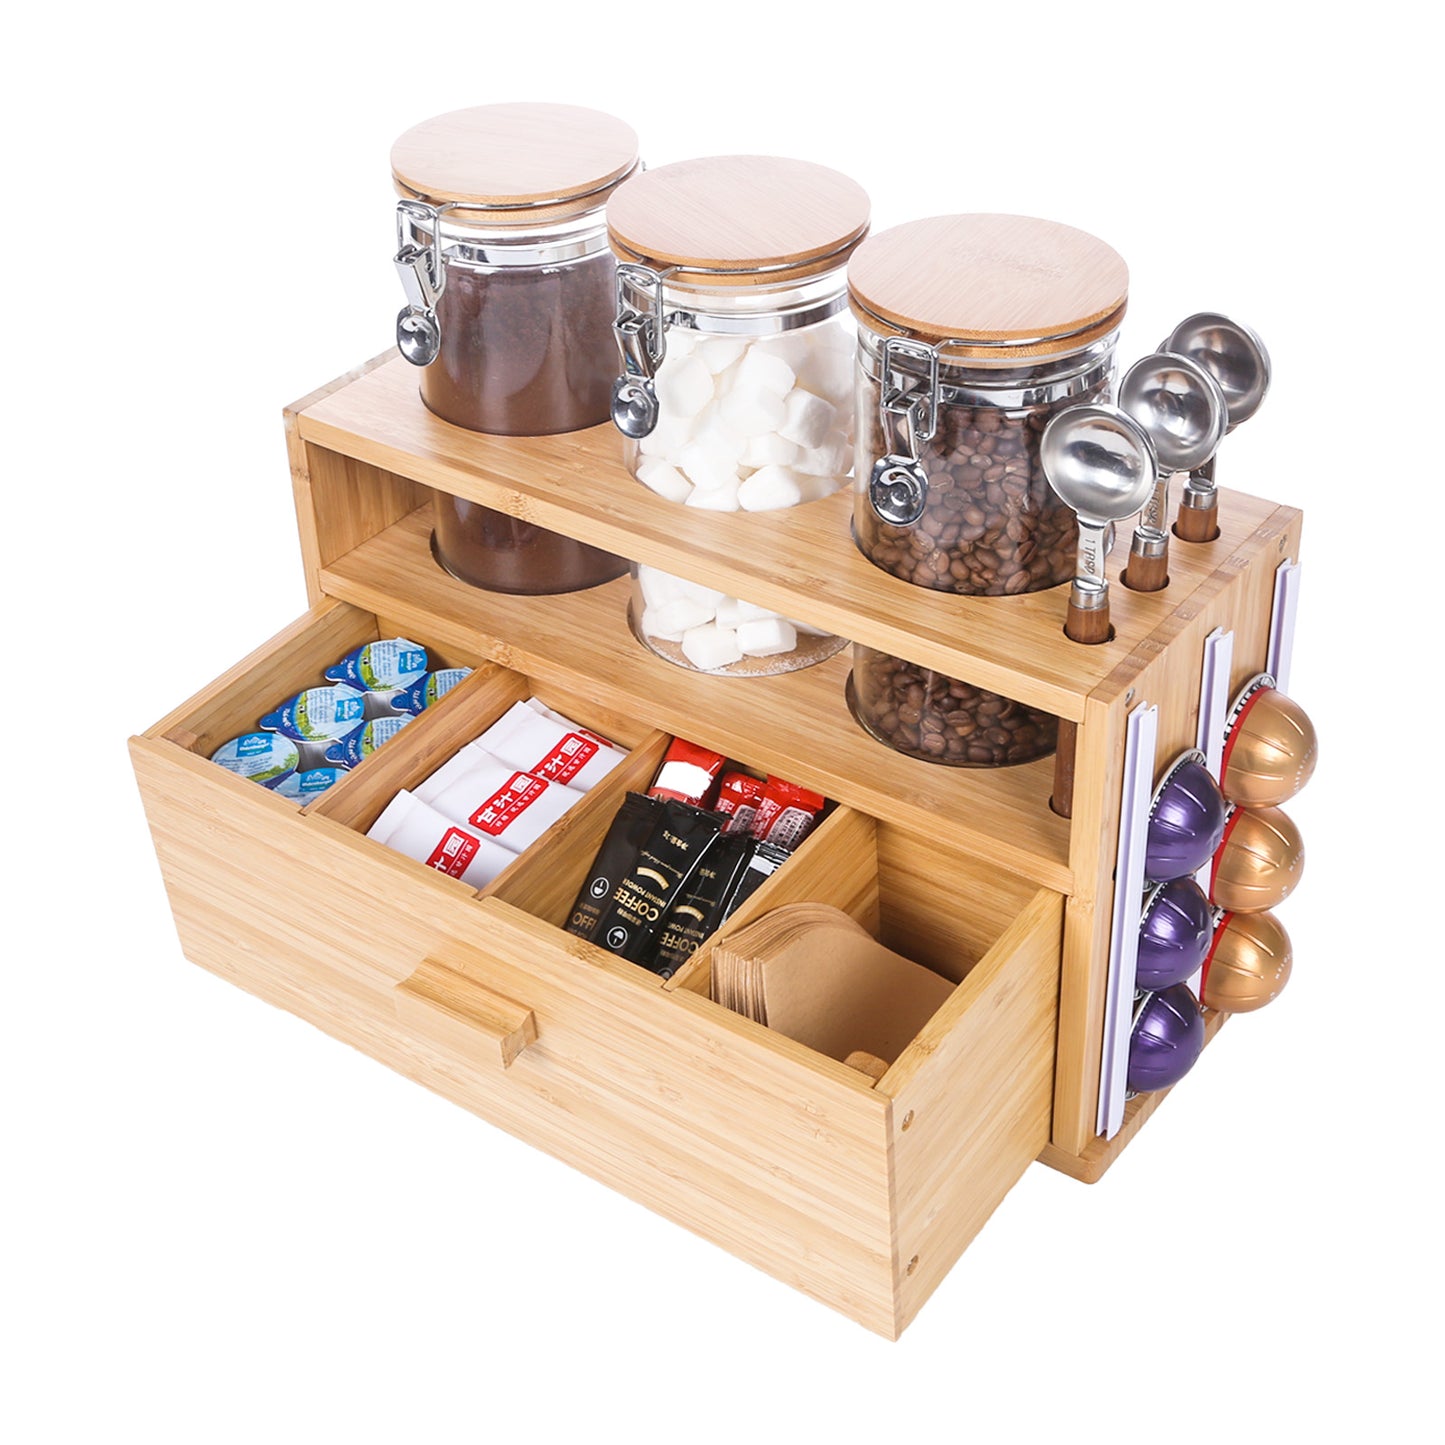 KKC Coffee Station Organizer, K Cup Coffee Pods Holder with Drawer